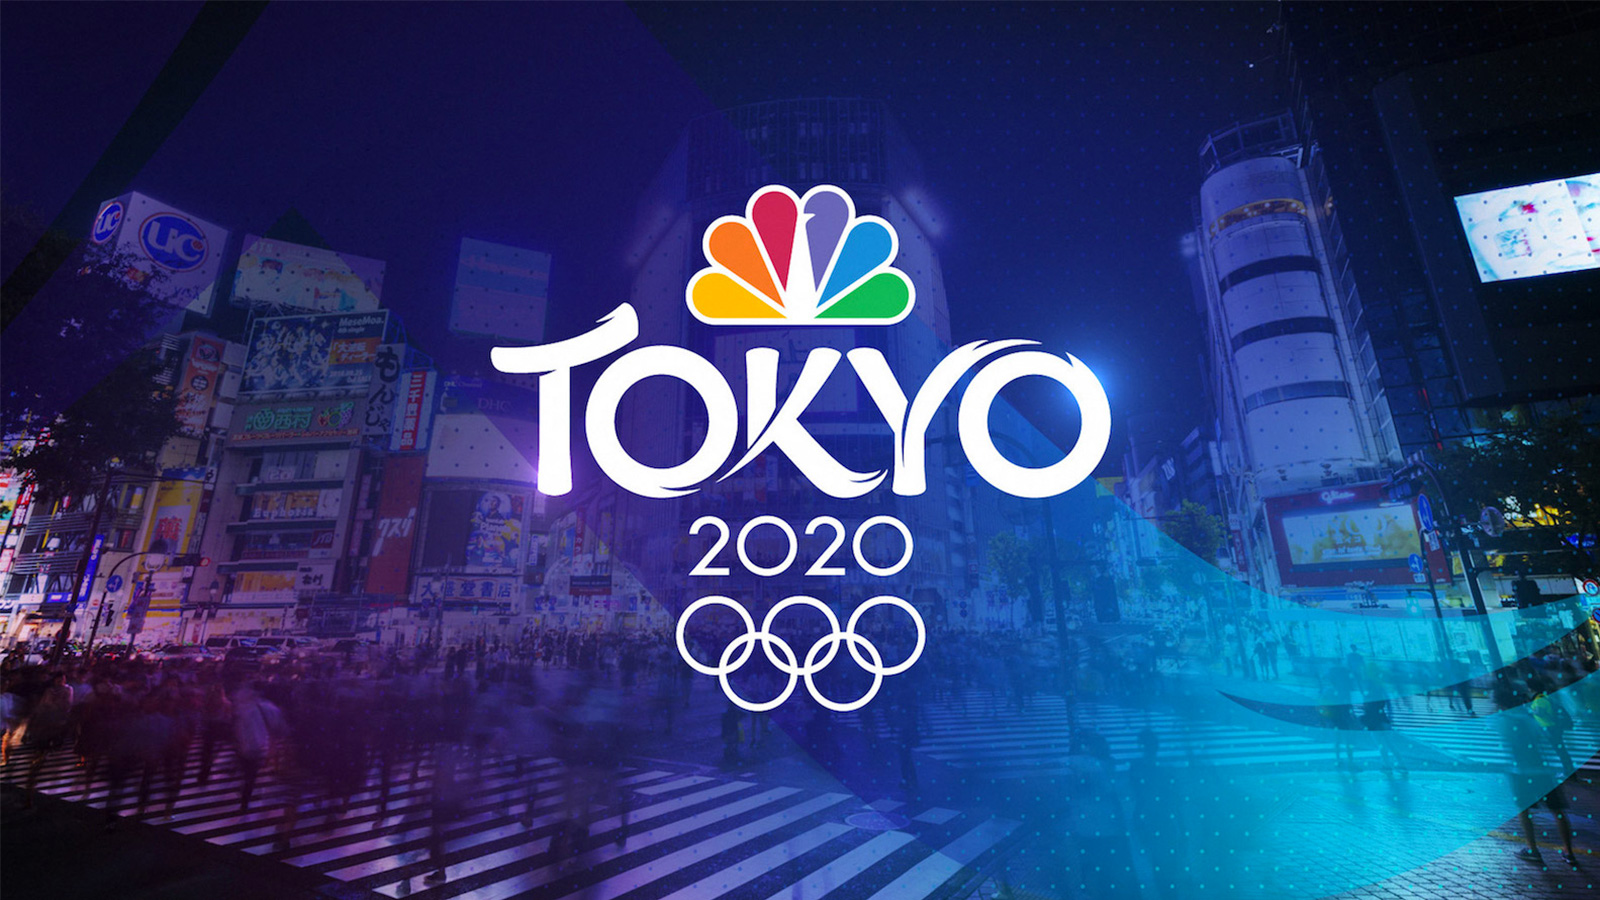 Brand New New Logo for NBC Olympics 2020 Broadcast by Mocean